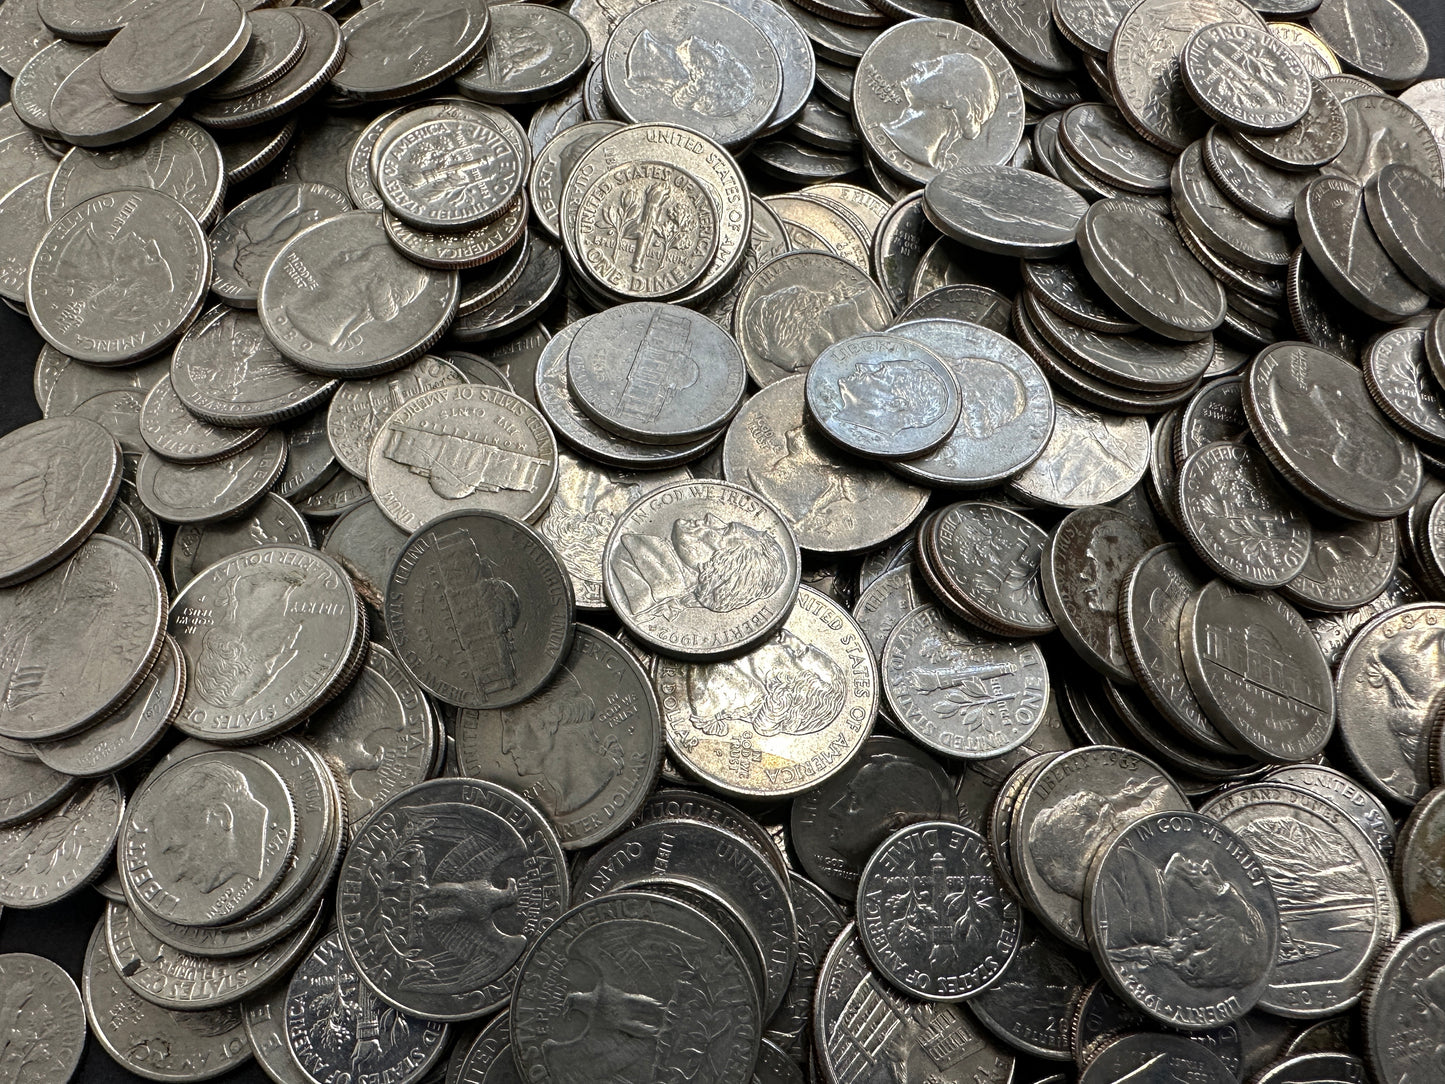 $50 USD Dollars in Coins - Great for tips in the USA - FREE SHIPPING